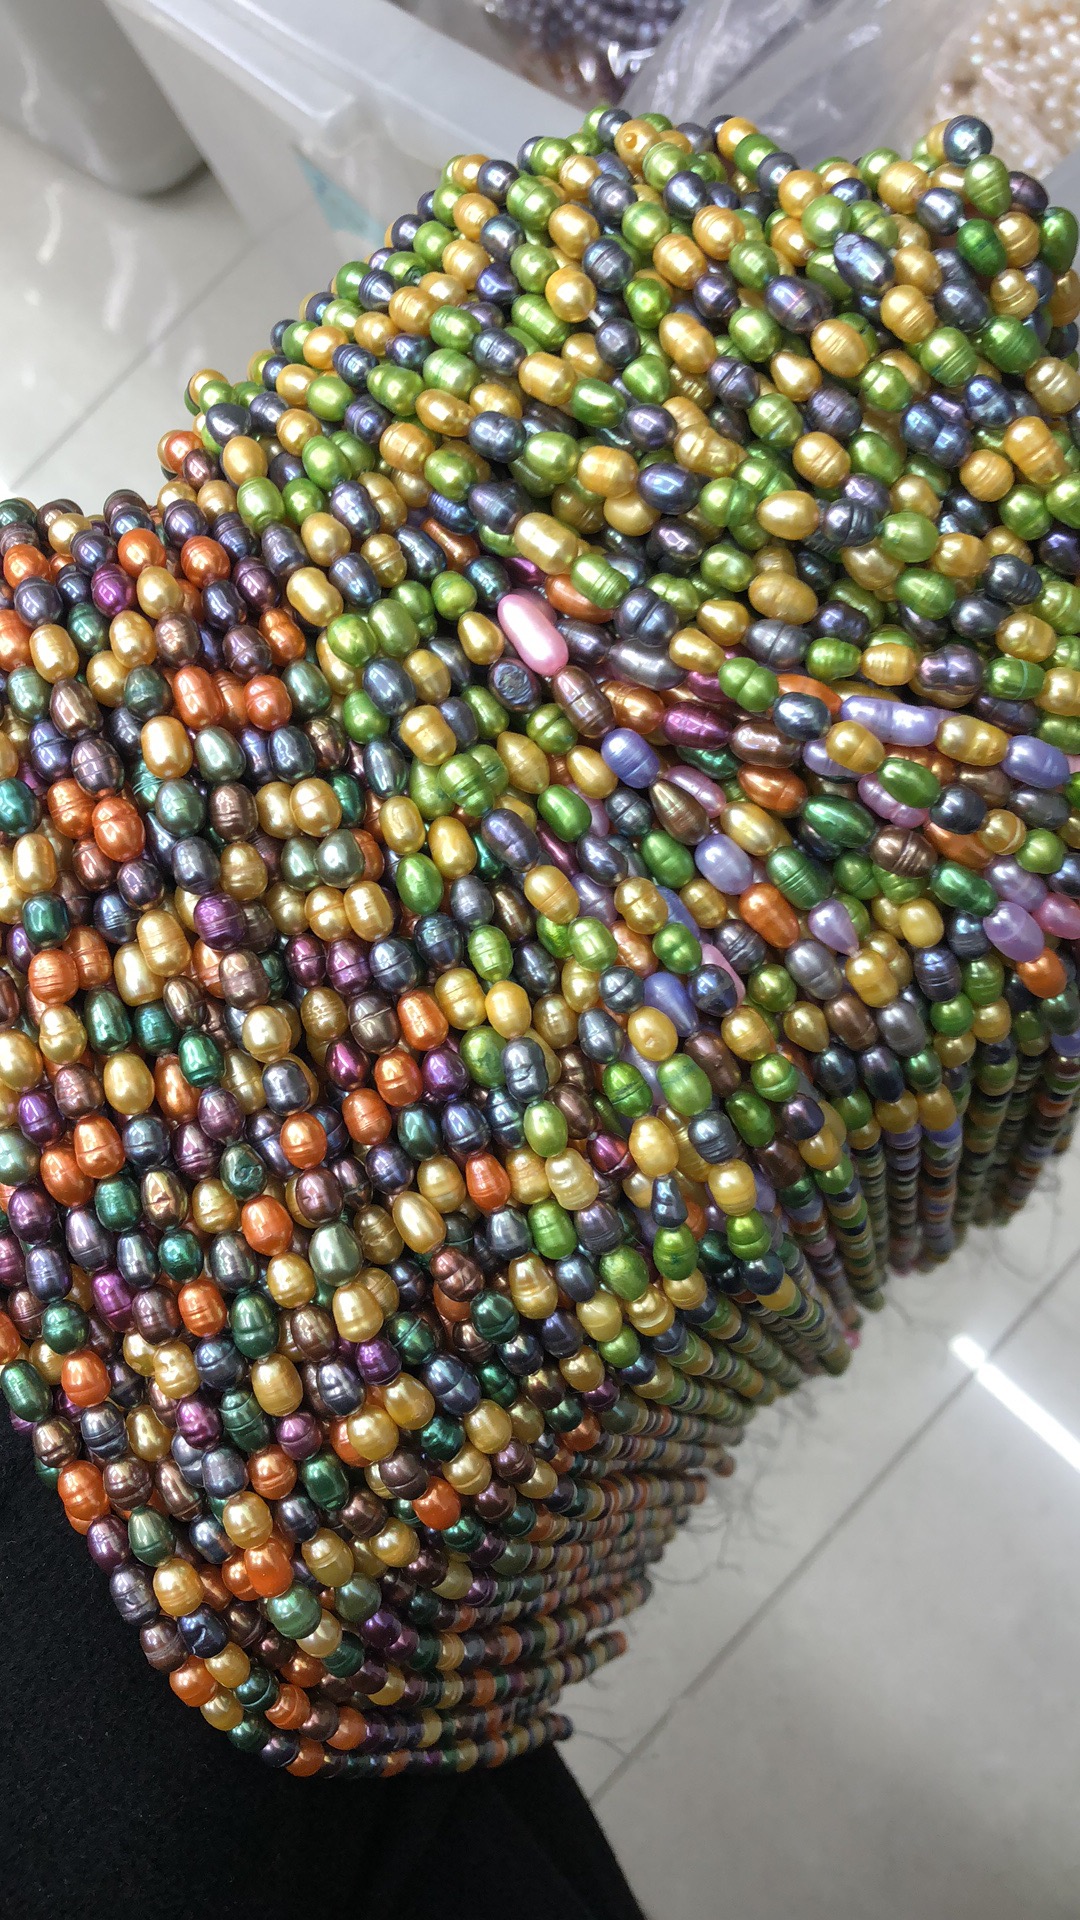 5-6 mm rice shape freshwater pearls for sale mix colors loose wholesale freshwater pearl in strand -37 cm